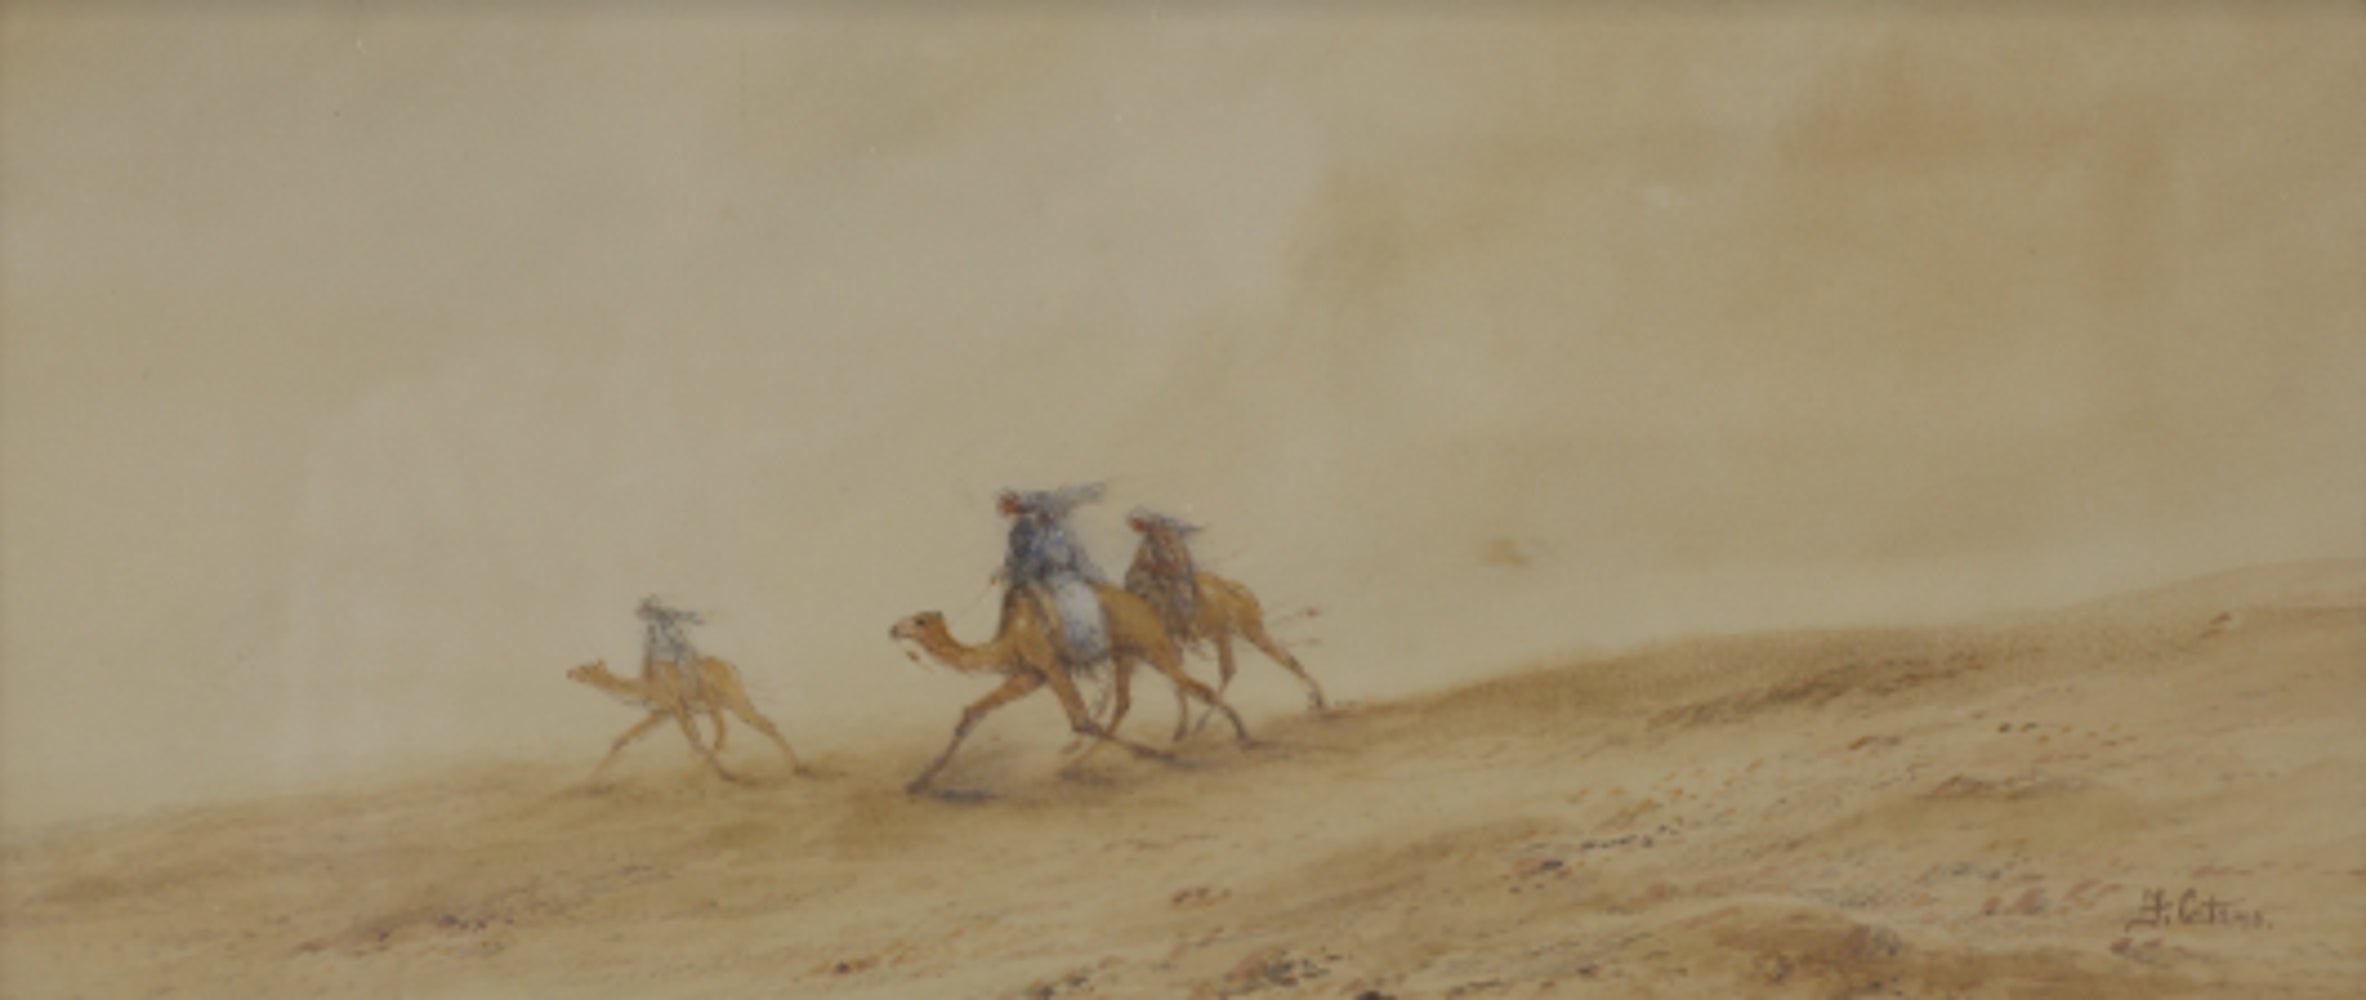 Running from the storm in the Sahara  Pencil and watercolor on paper  by F. Catano